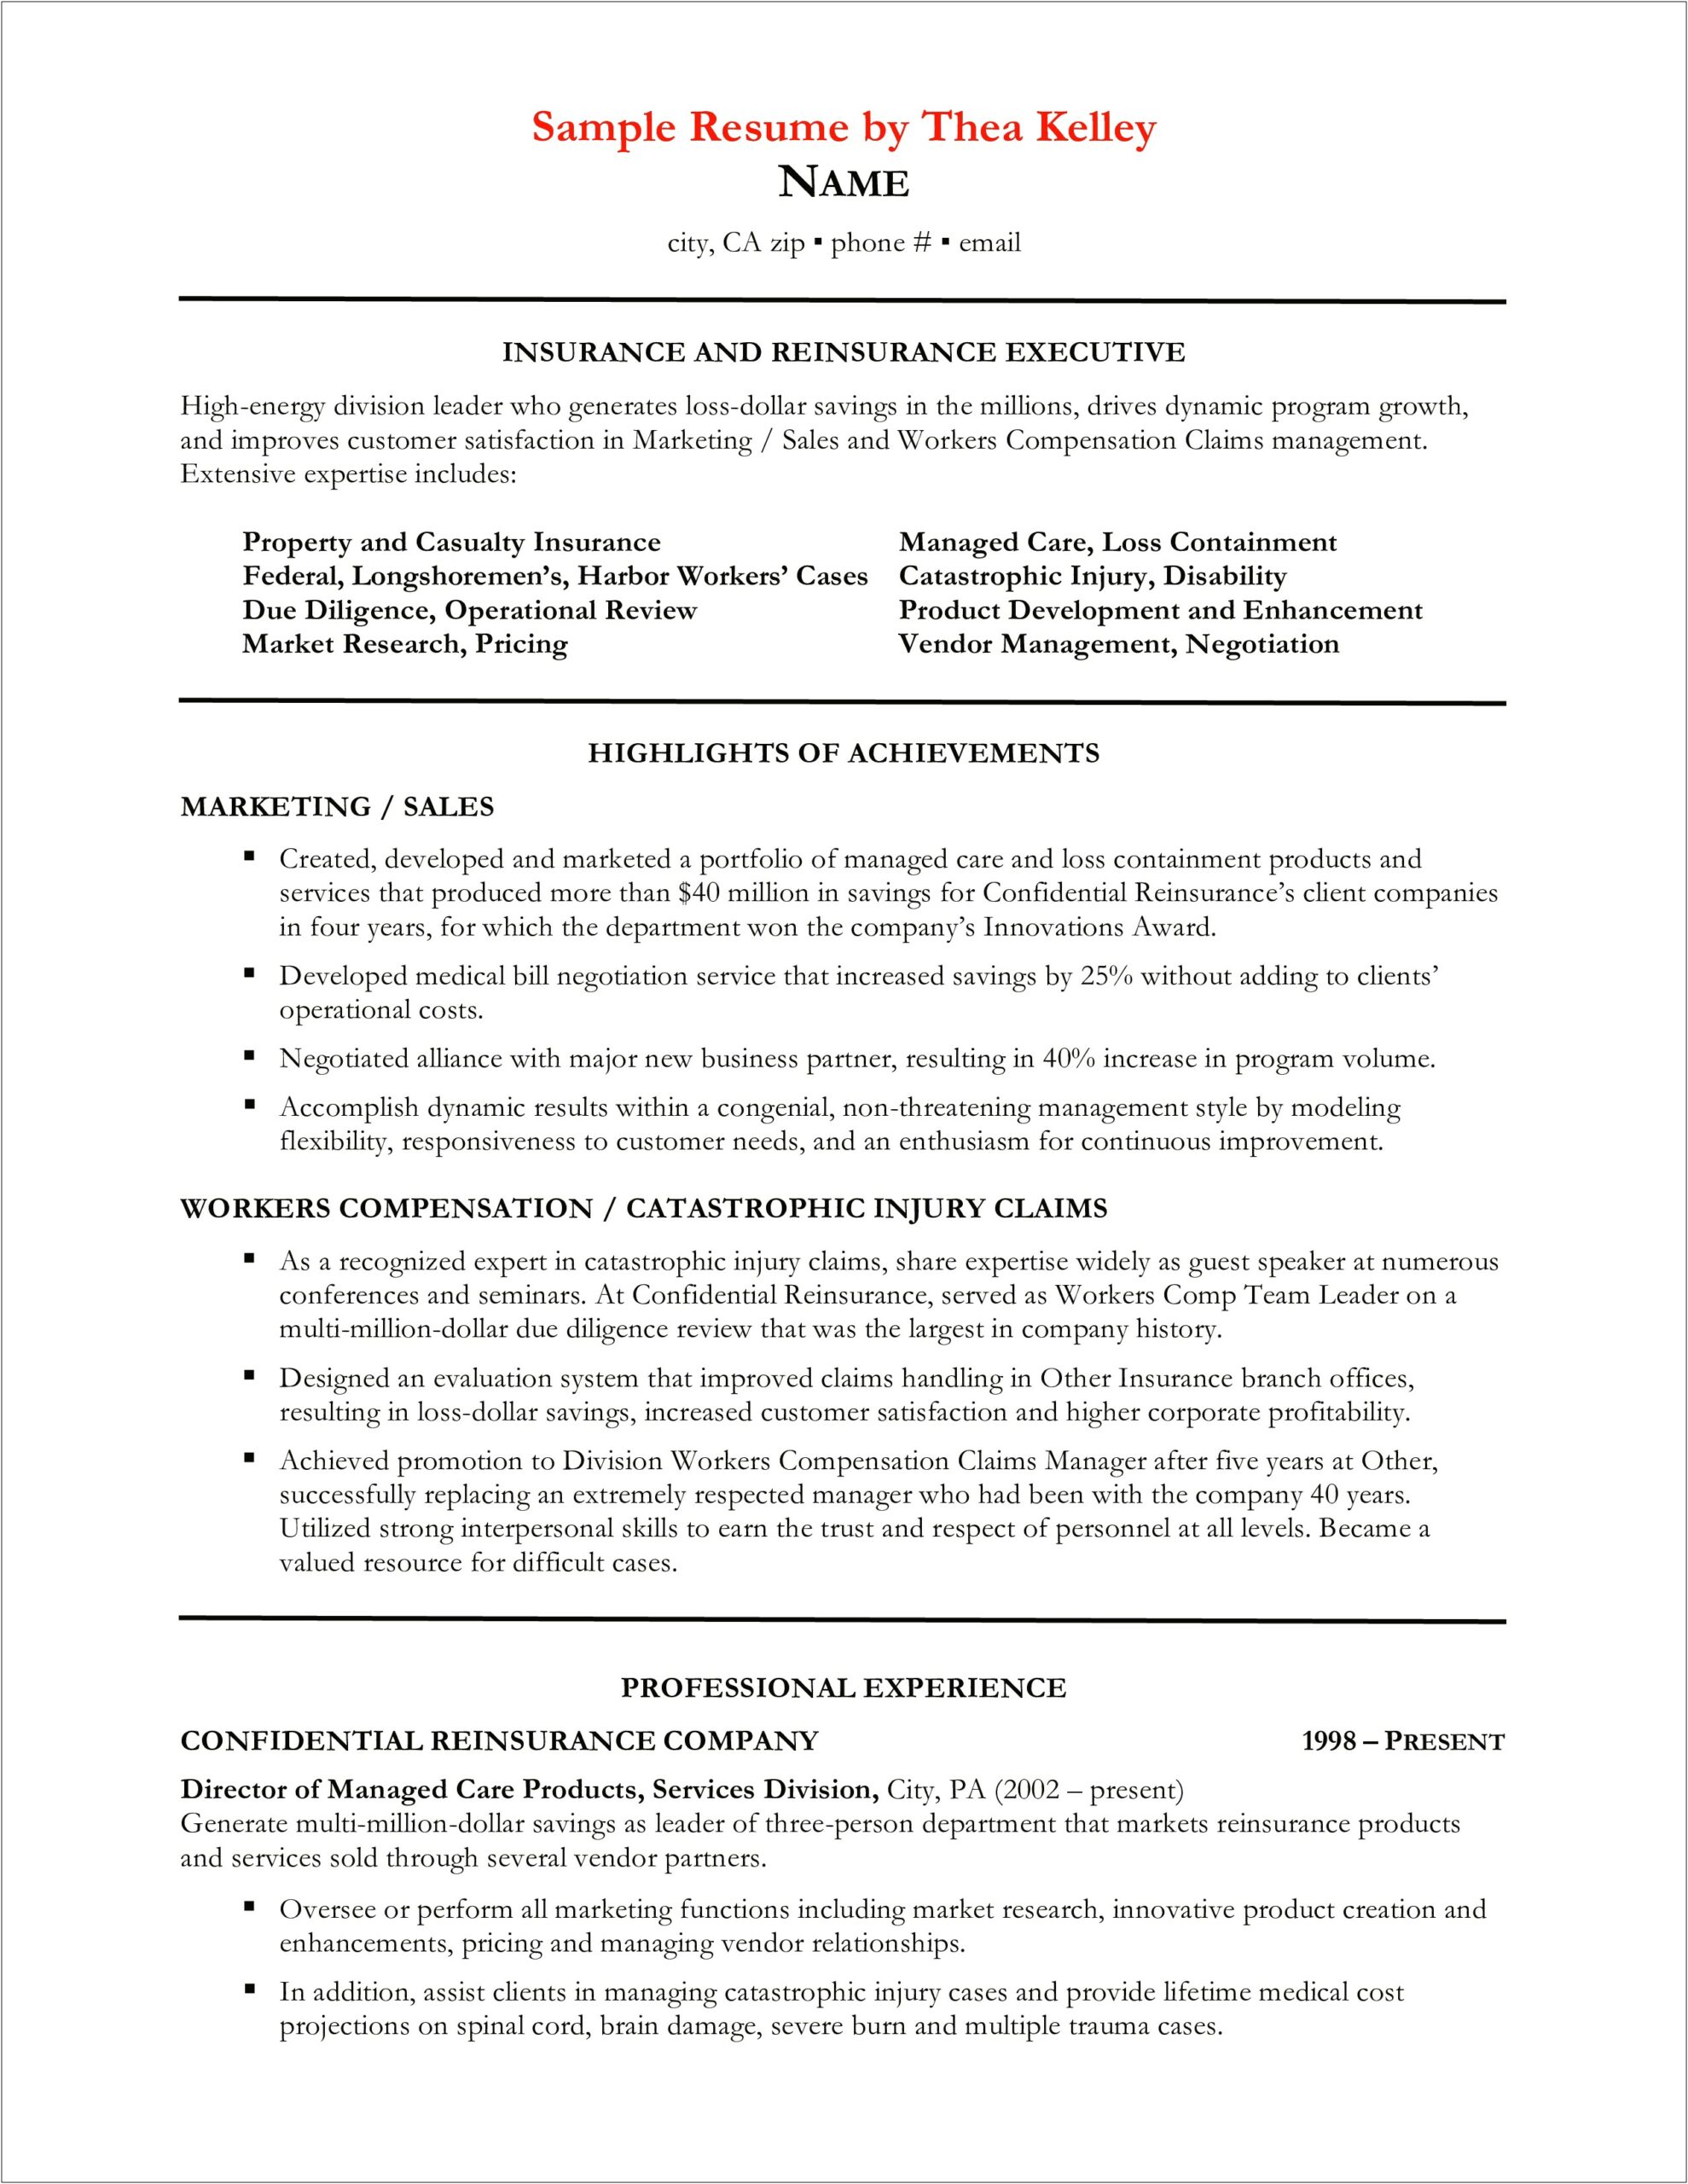 Sample Resume For Sales Executive